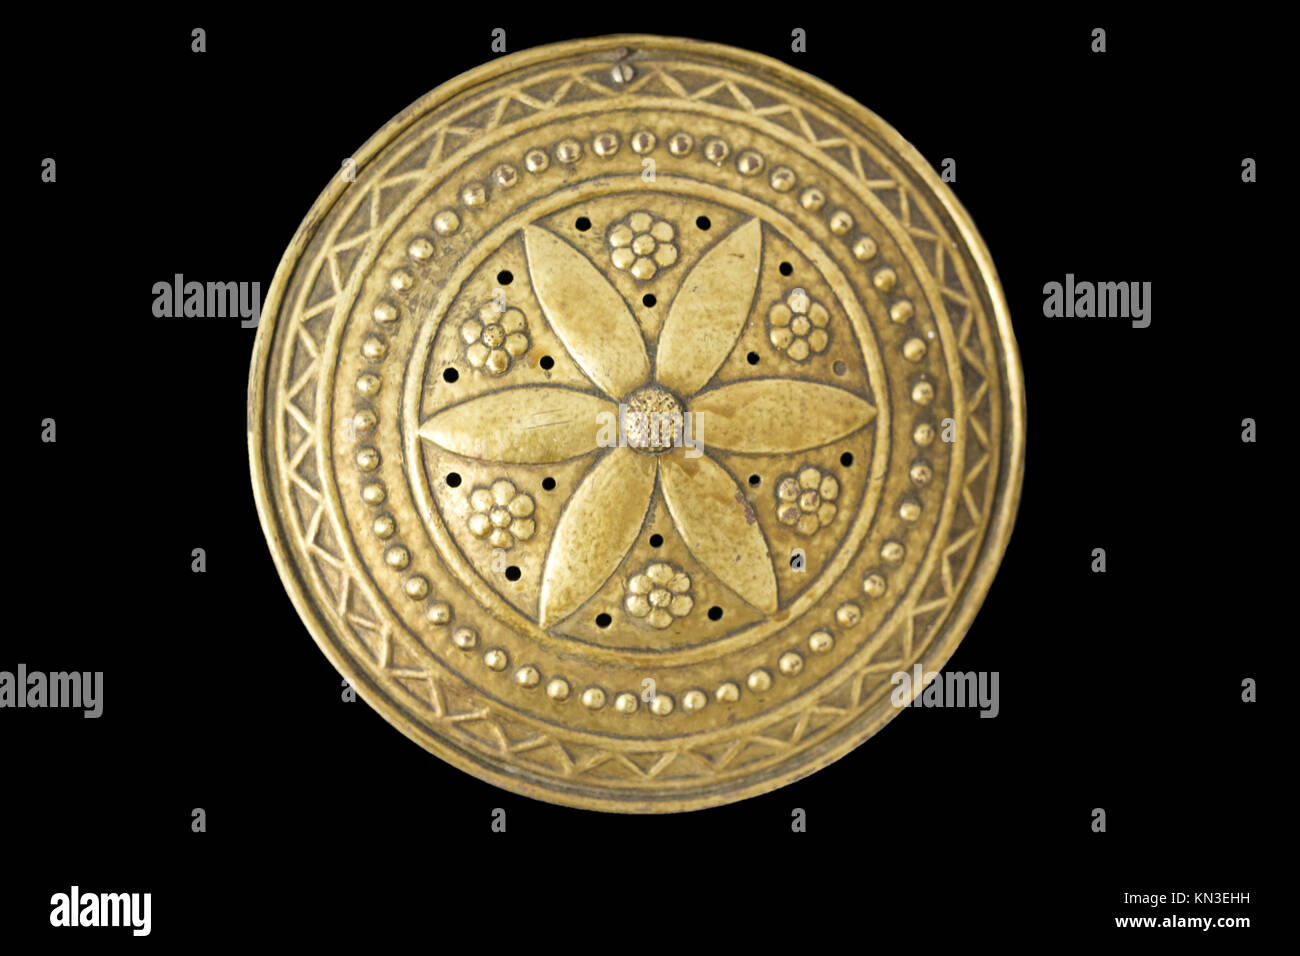 Antique heater made of brass decorated with floral figures. Isolated over black background. Stock Photo